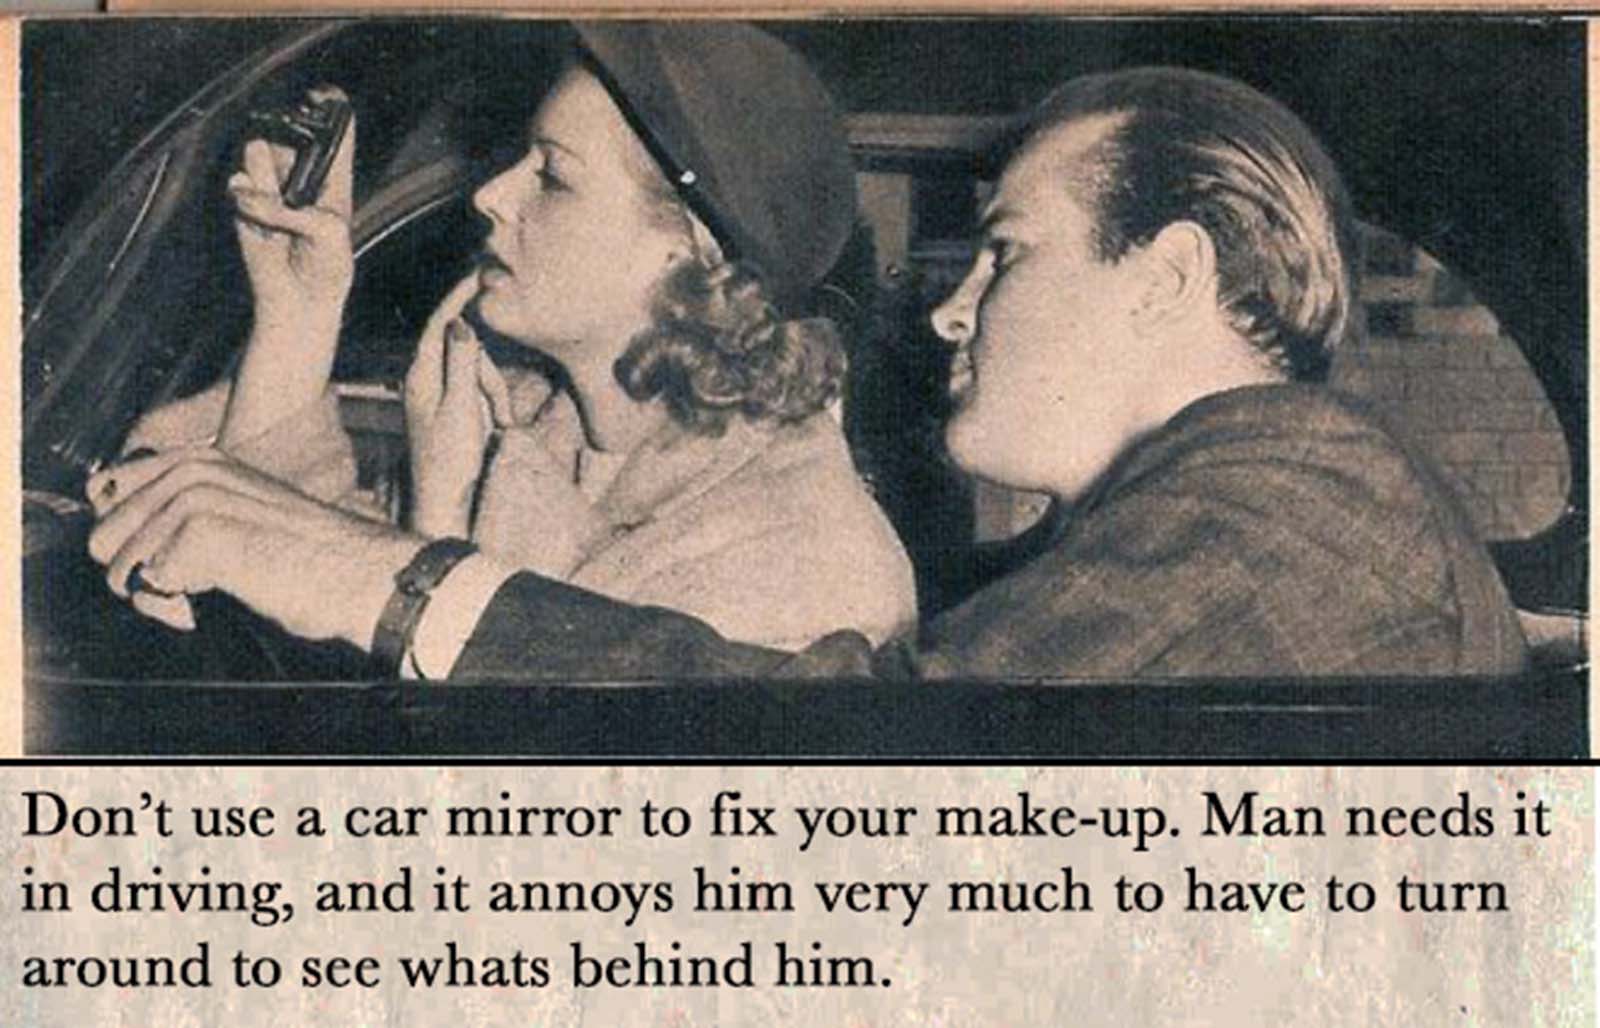 Don't use the car mirror to fix your make-up.